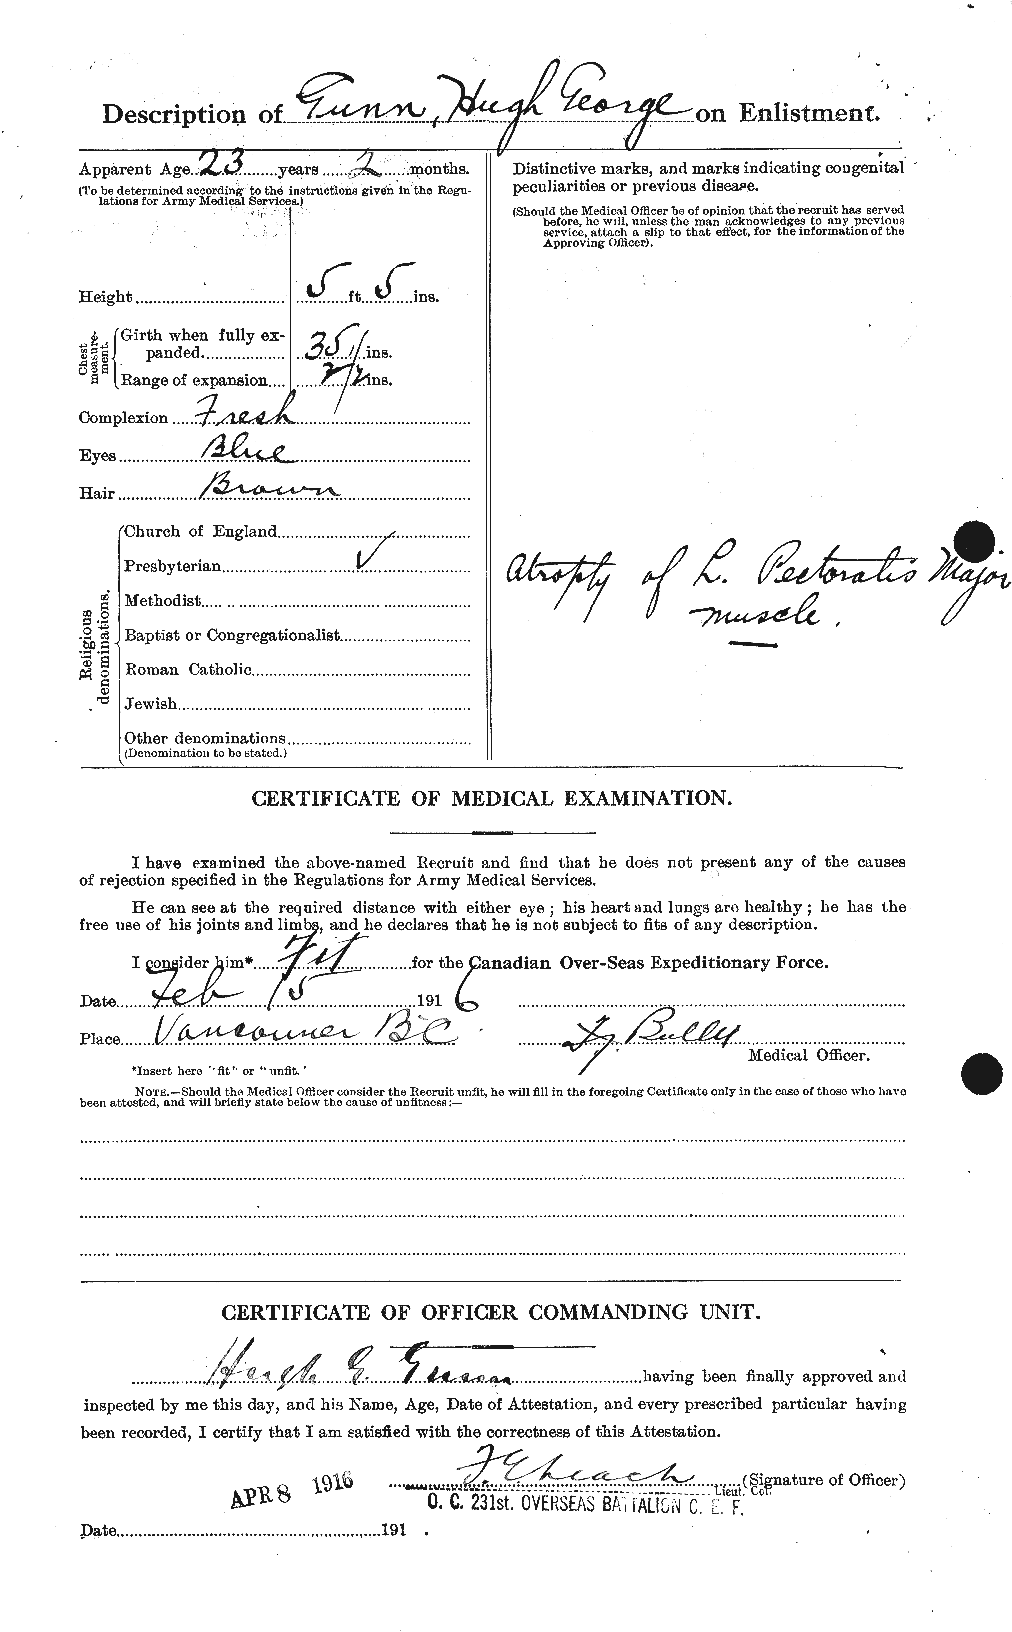 Personnel Records of the First World War - CEF 369263b